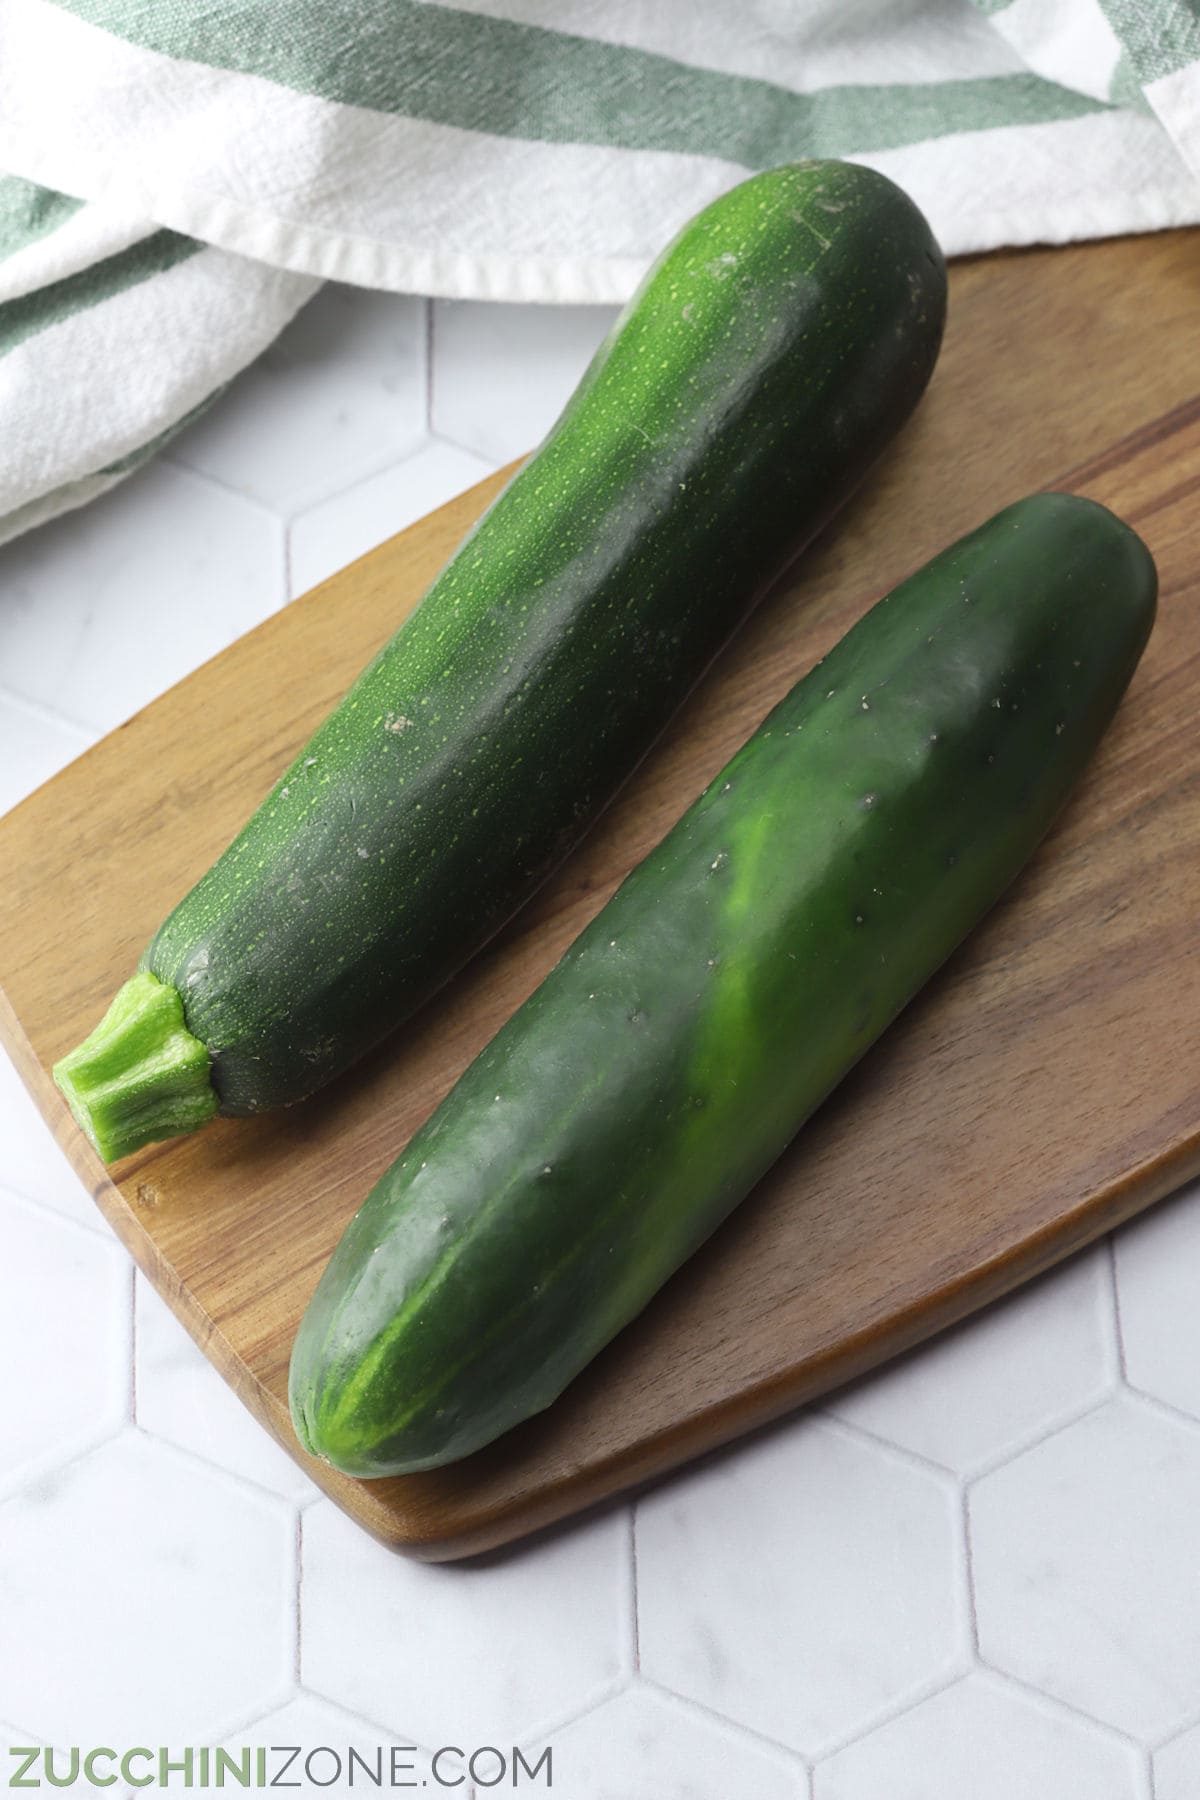 Zucchini and cucumber laying on a wooden cutting board.